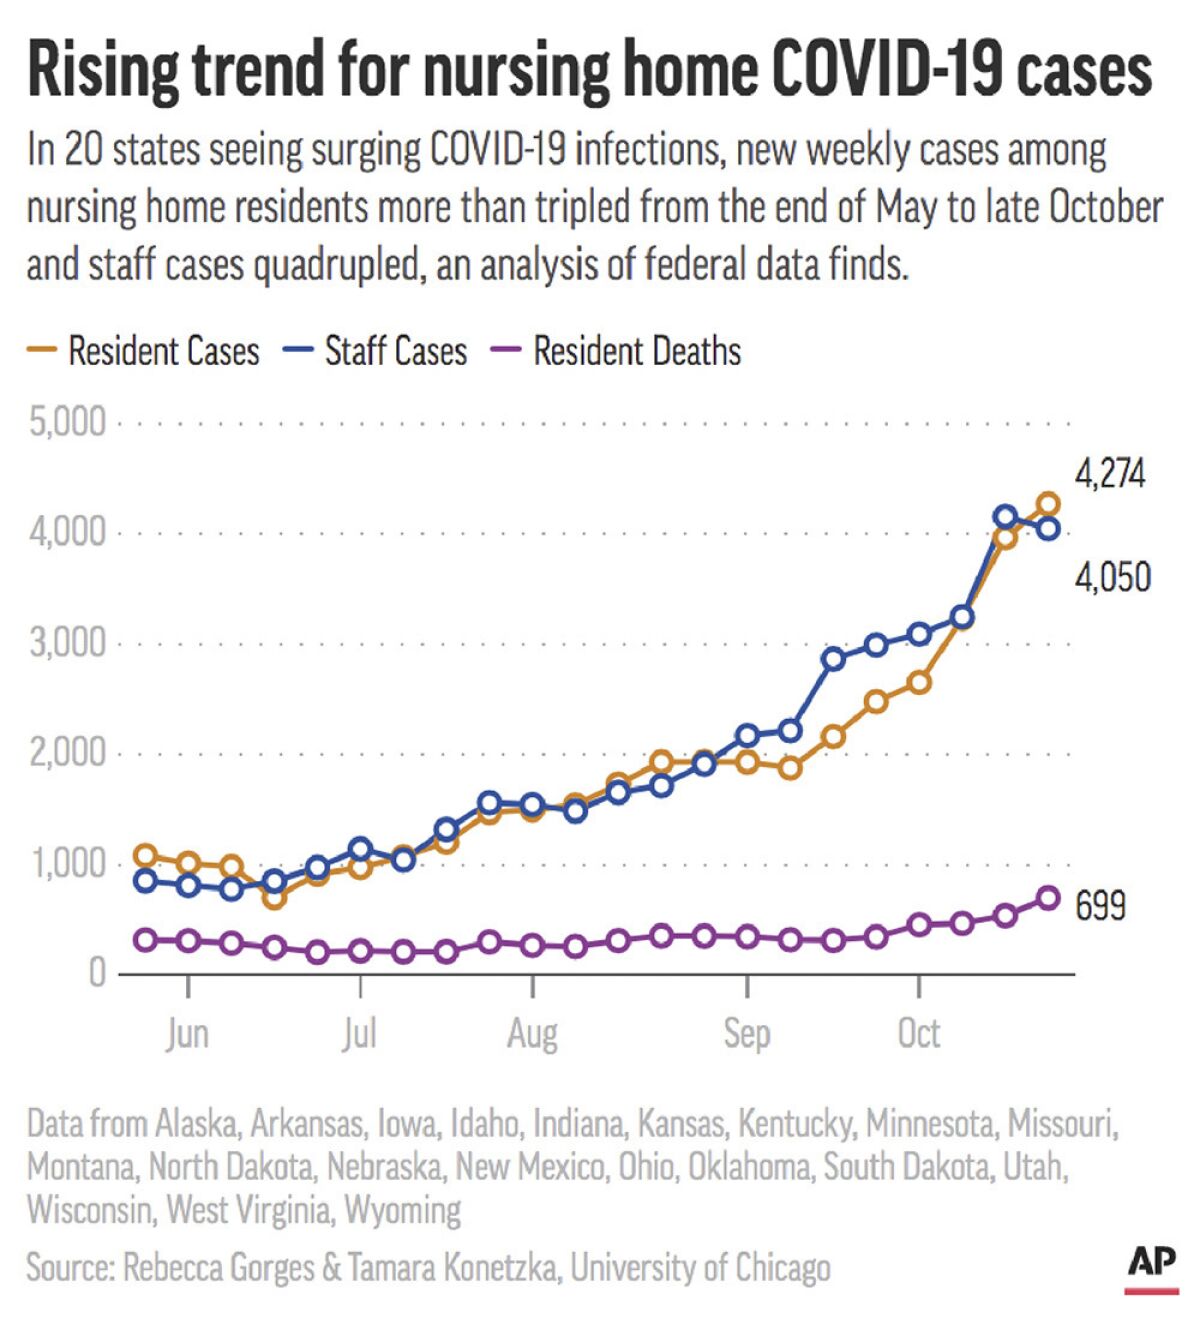 Weekly COVID-19 infections in nursing homes in 20 states have been rising since May. (AP Graphic)